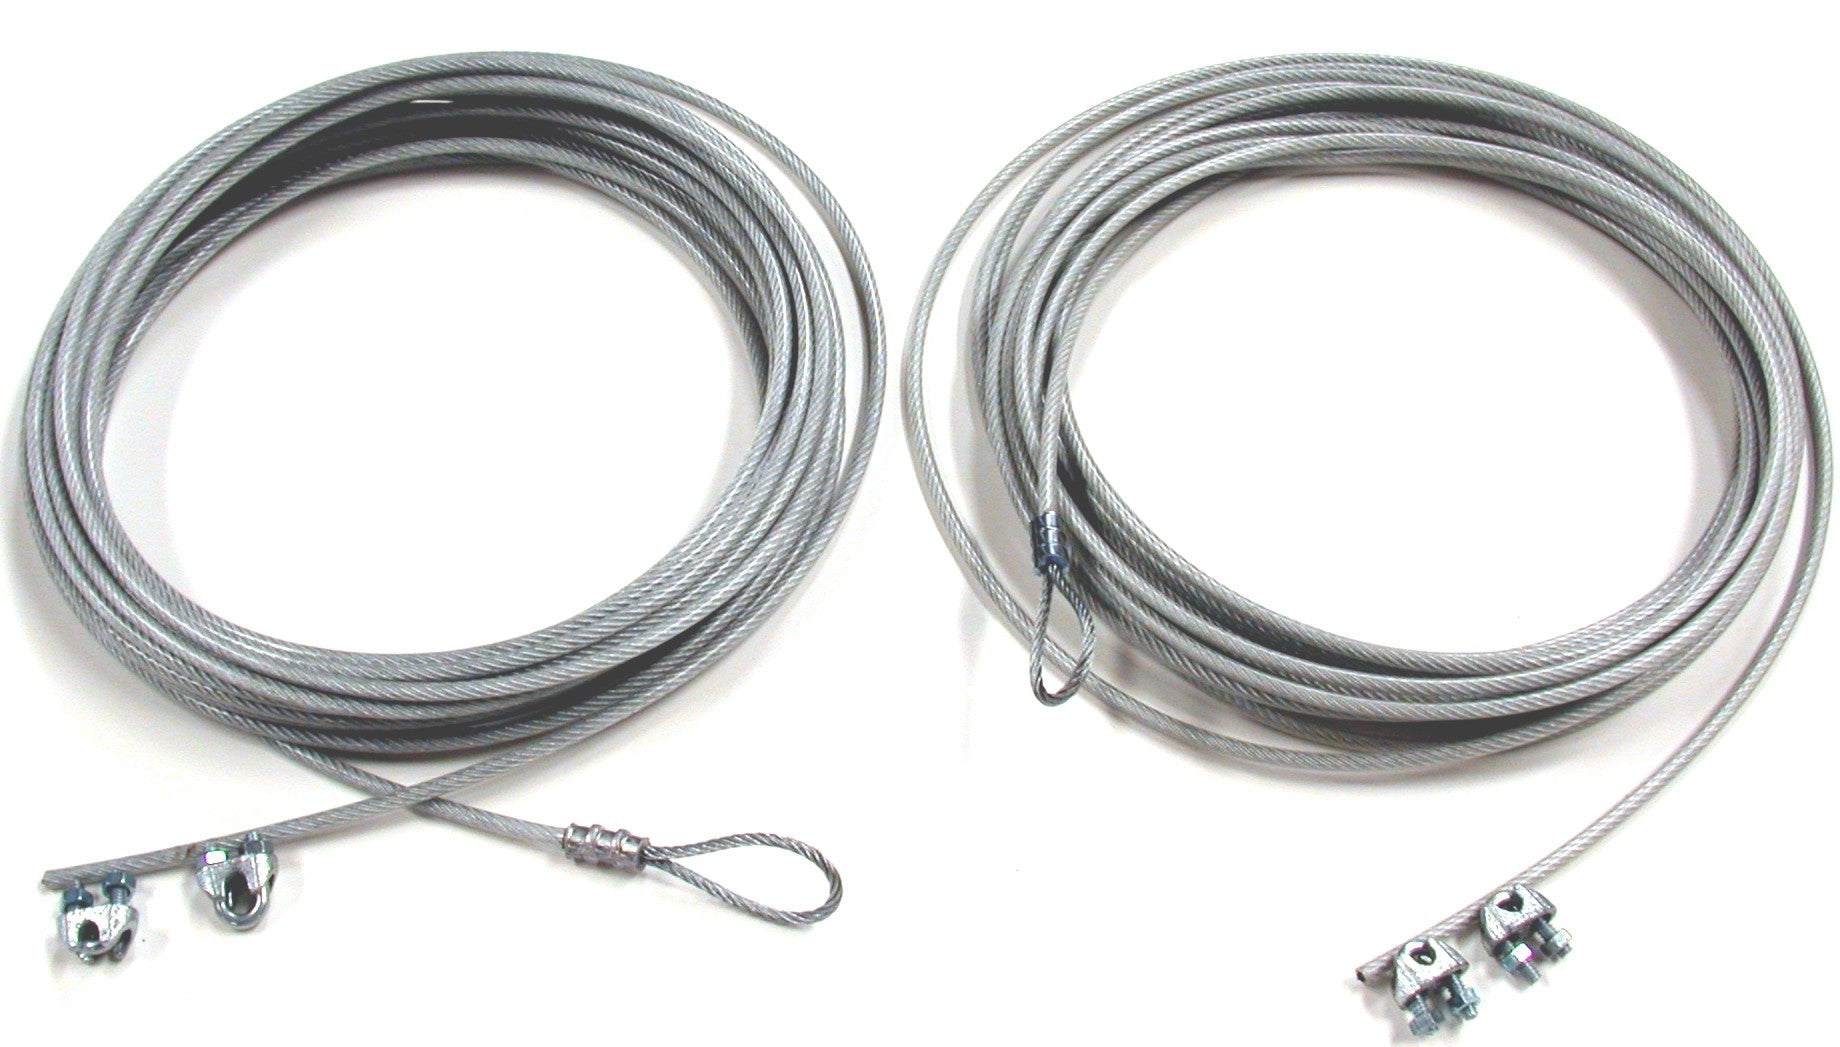 TBC4540-net cable kit, top & bottom plastic covered 1/8-inch steel aircraft cables & clamps